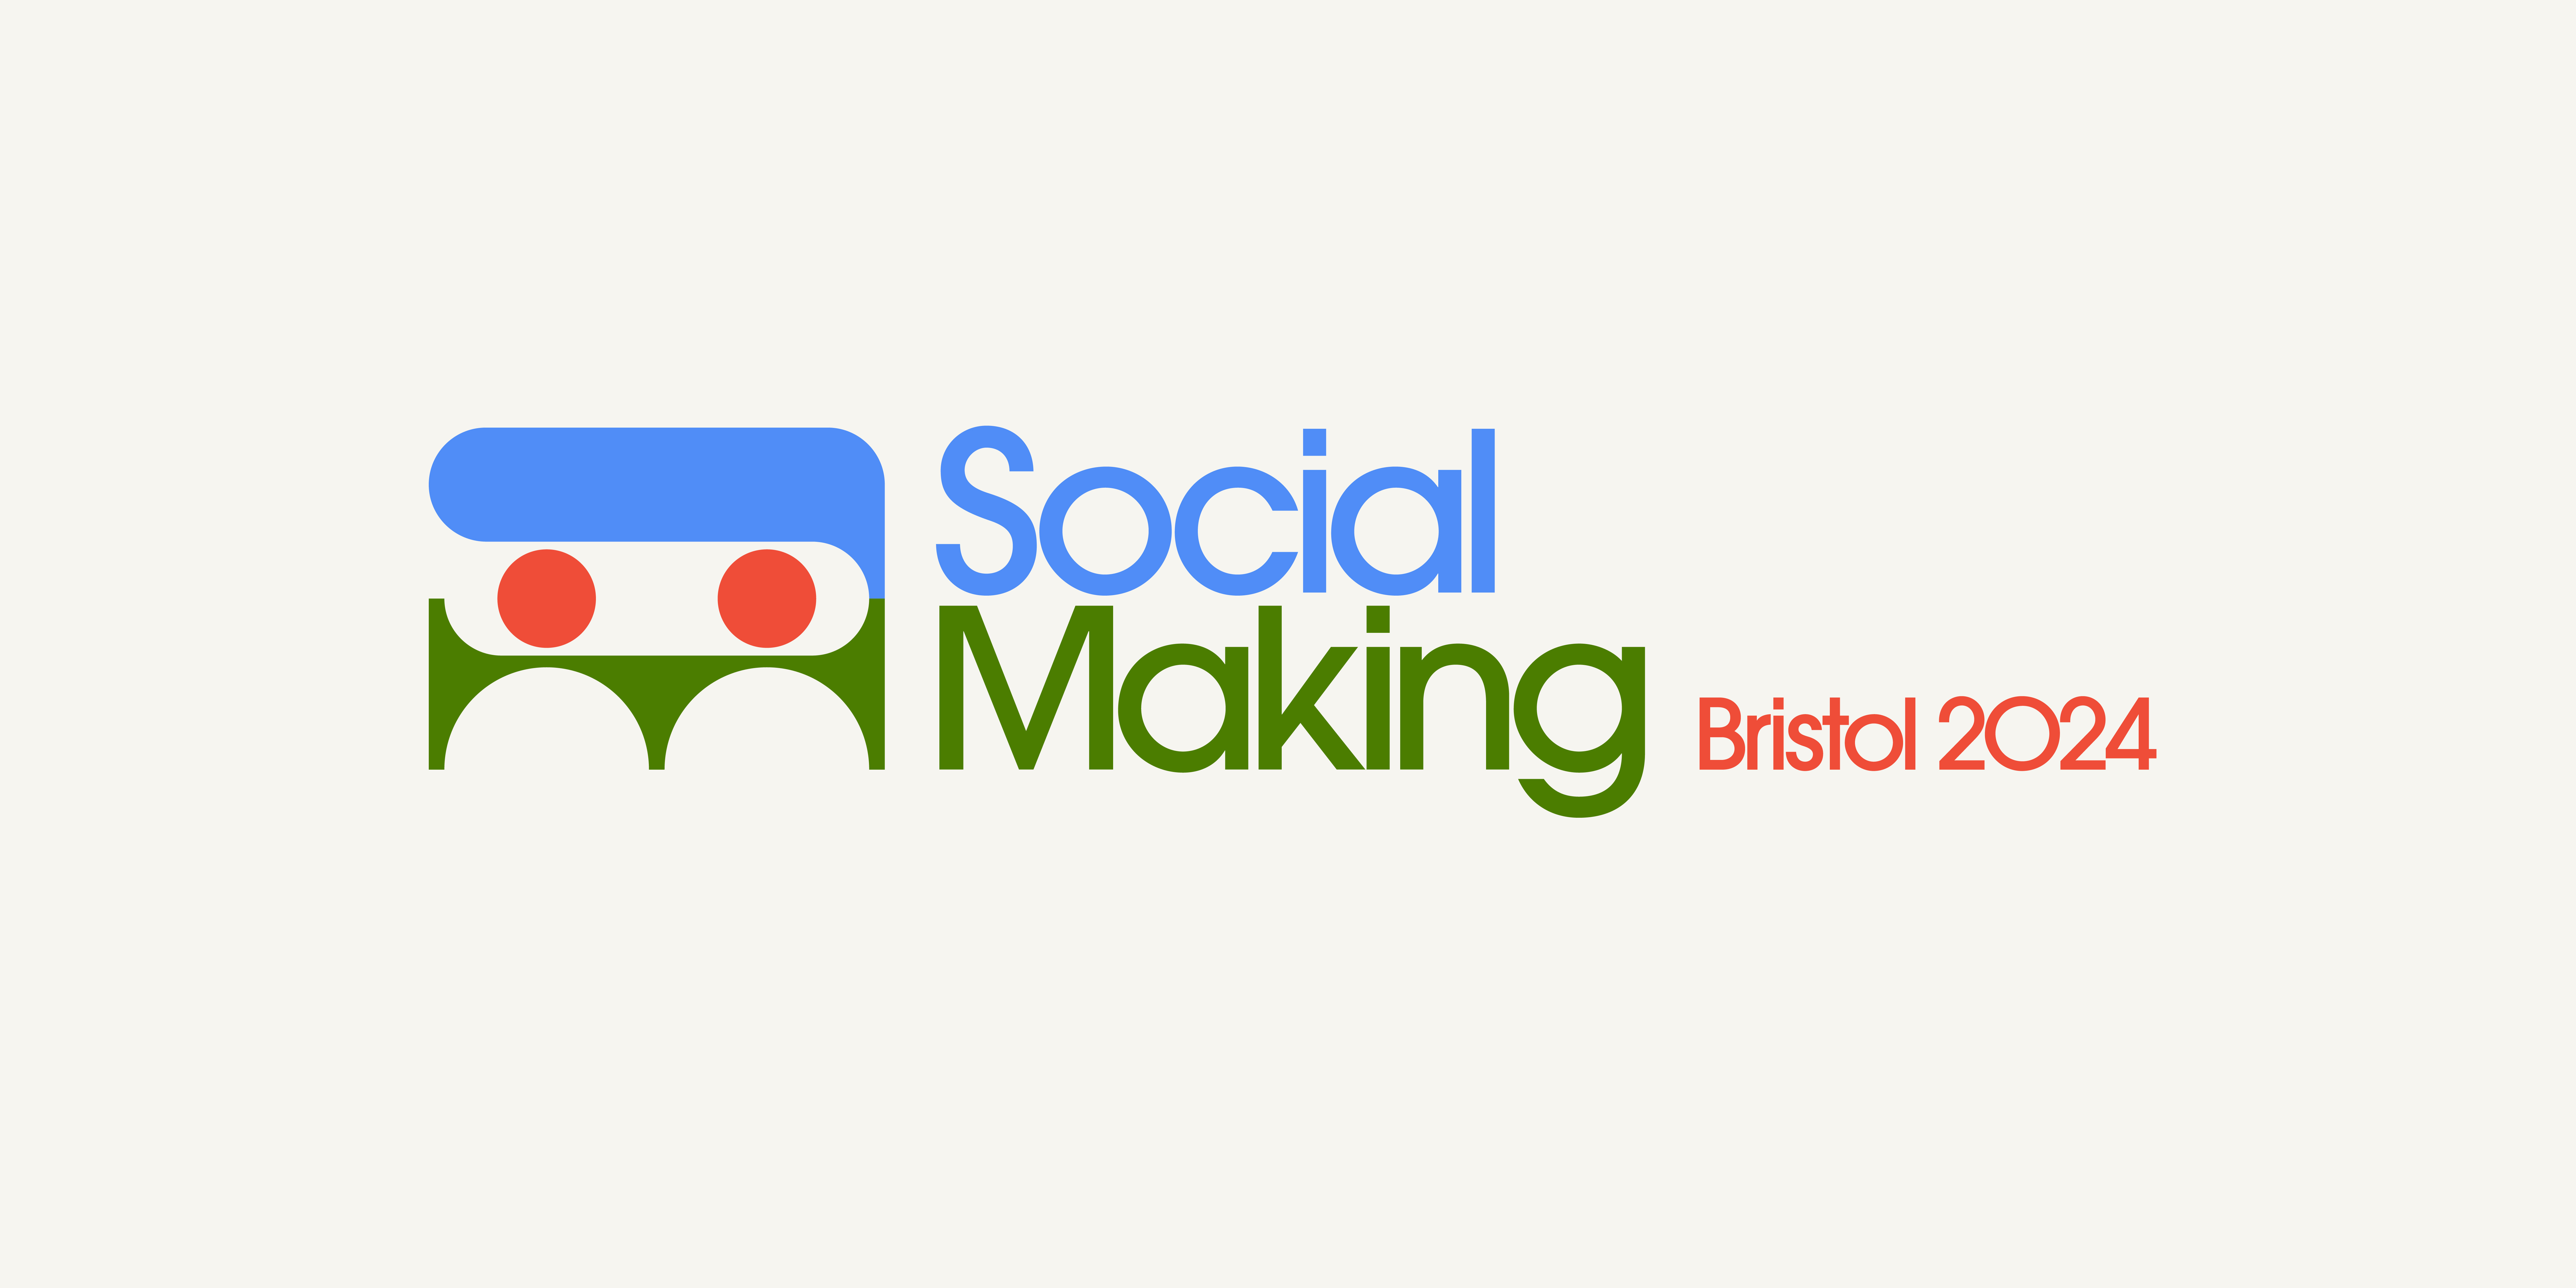 The image is a banner of the Social Making Logo